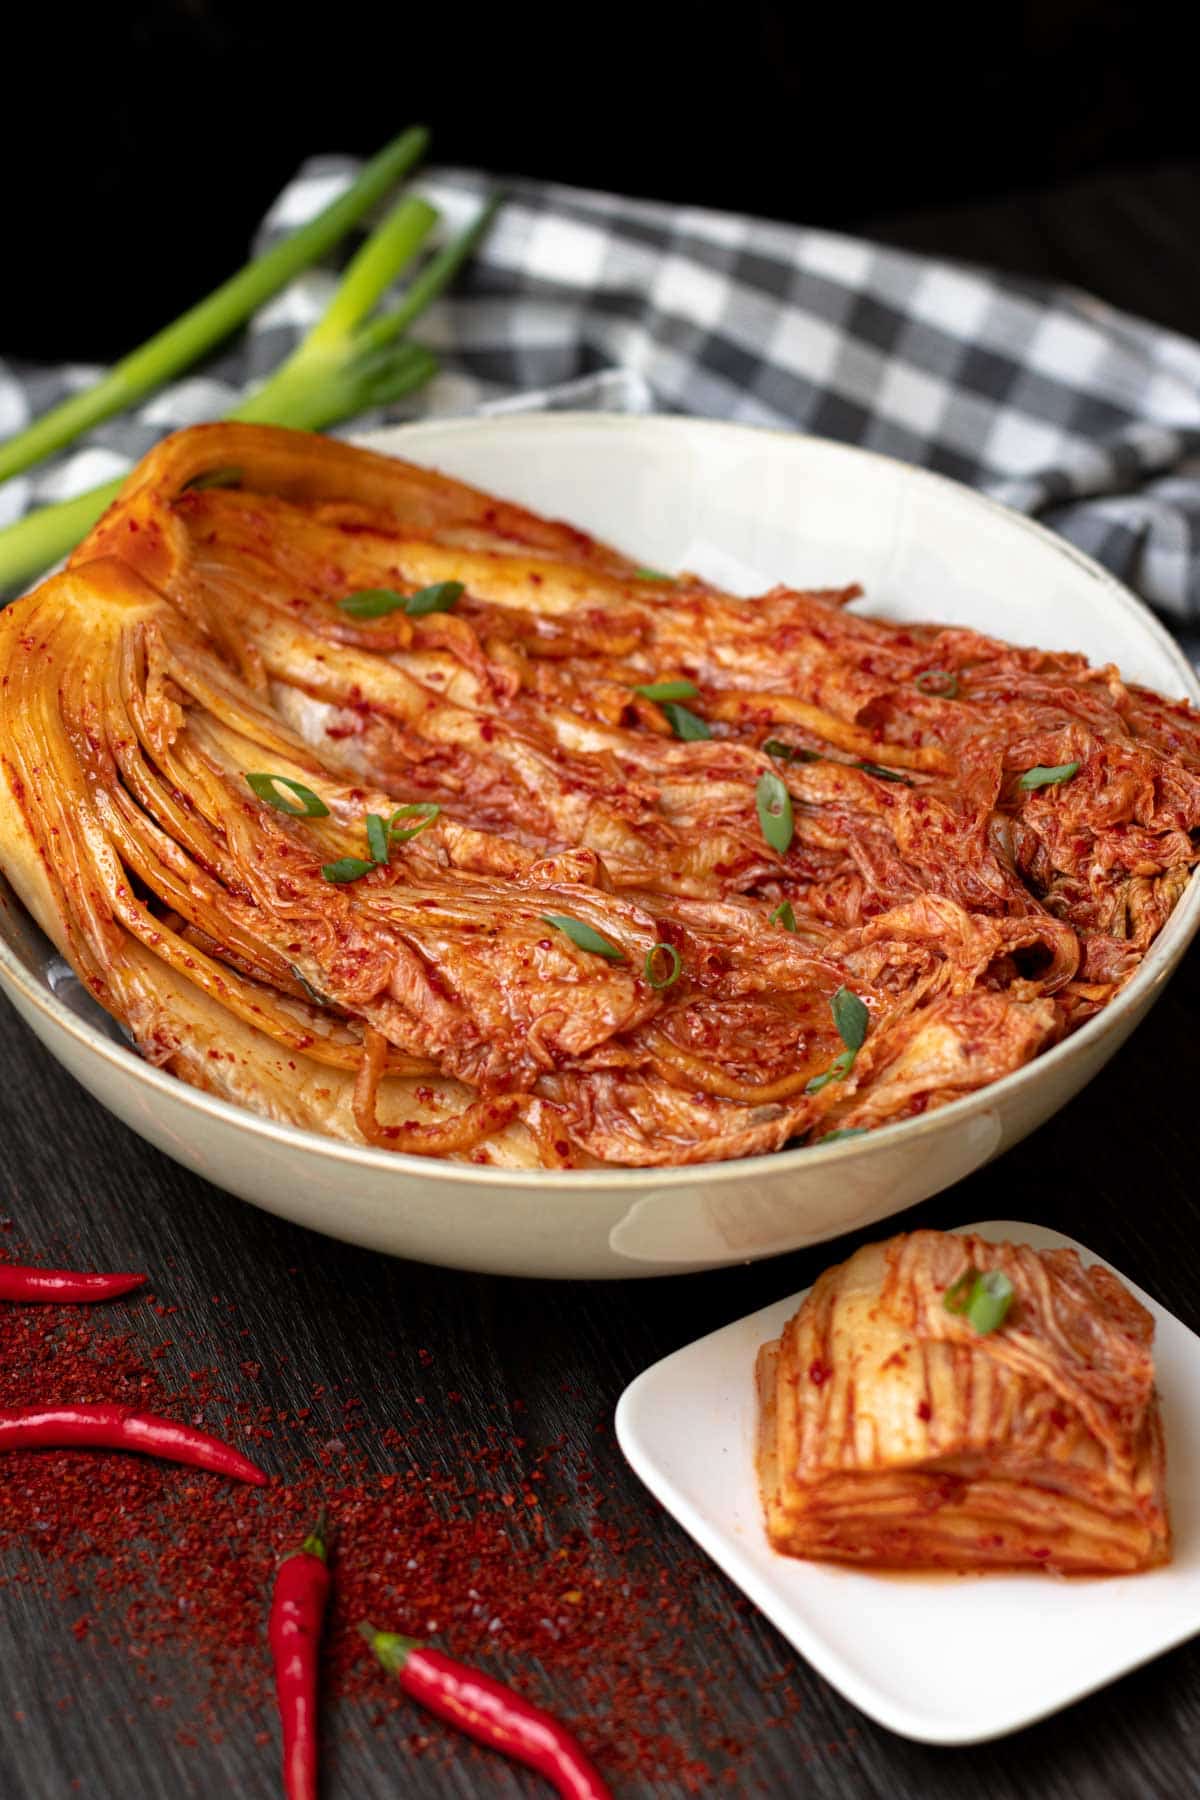 kimchi with napa cabbage korean traditional side dish fermented cabbage in a spicy sauce with red chilli flakes